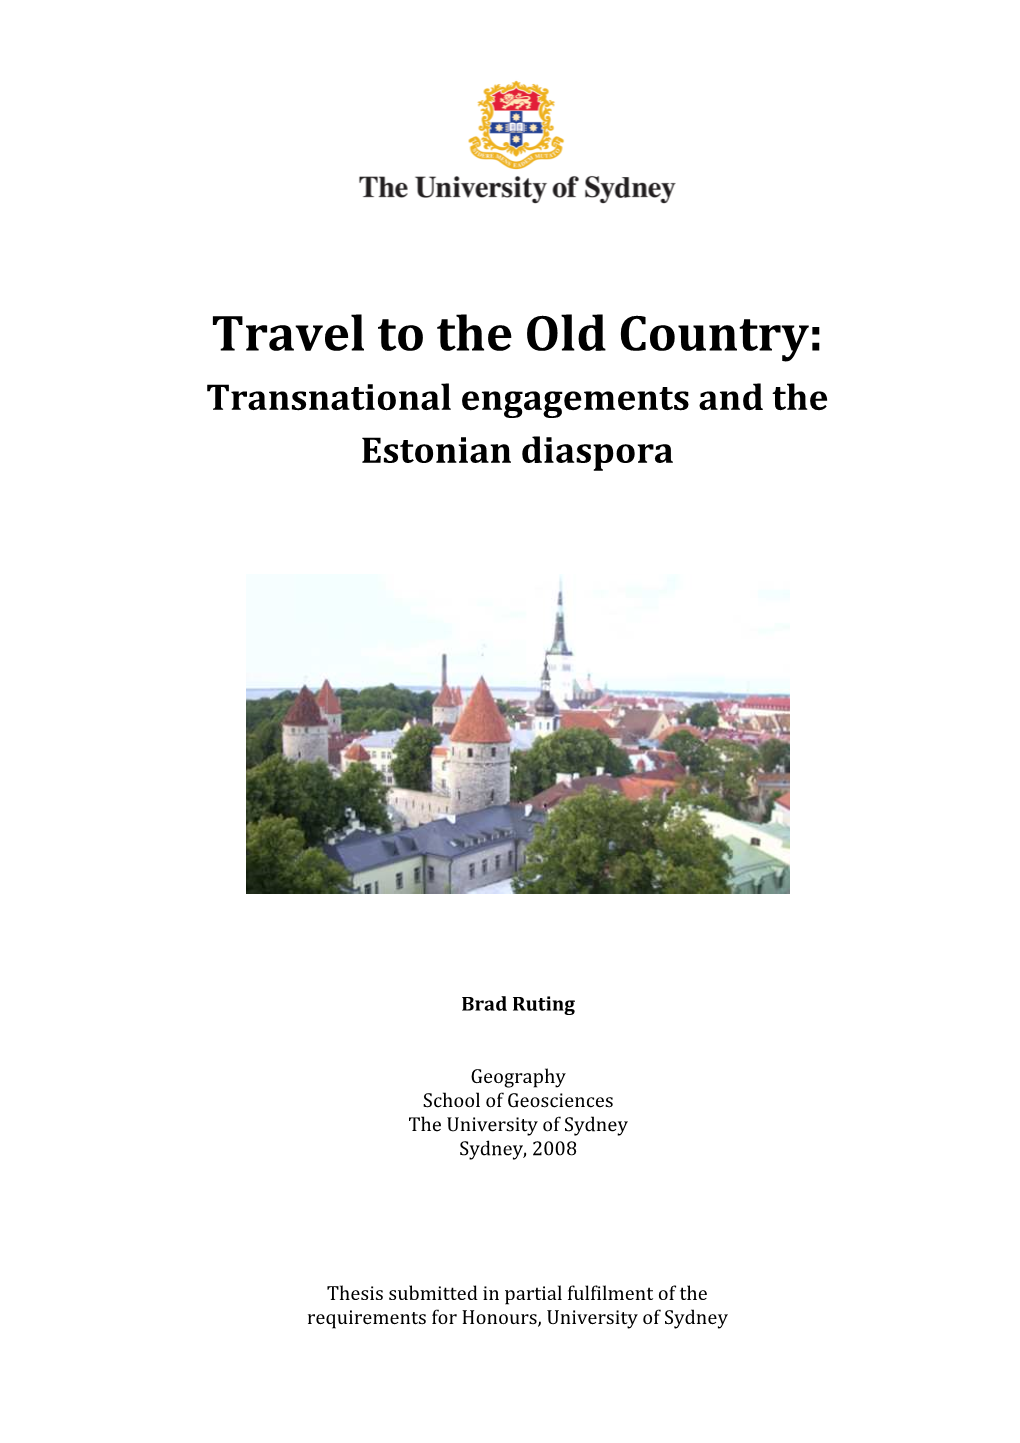 Travel to the Old Country: Transnational Engagements and the Estonian Diaspora